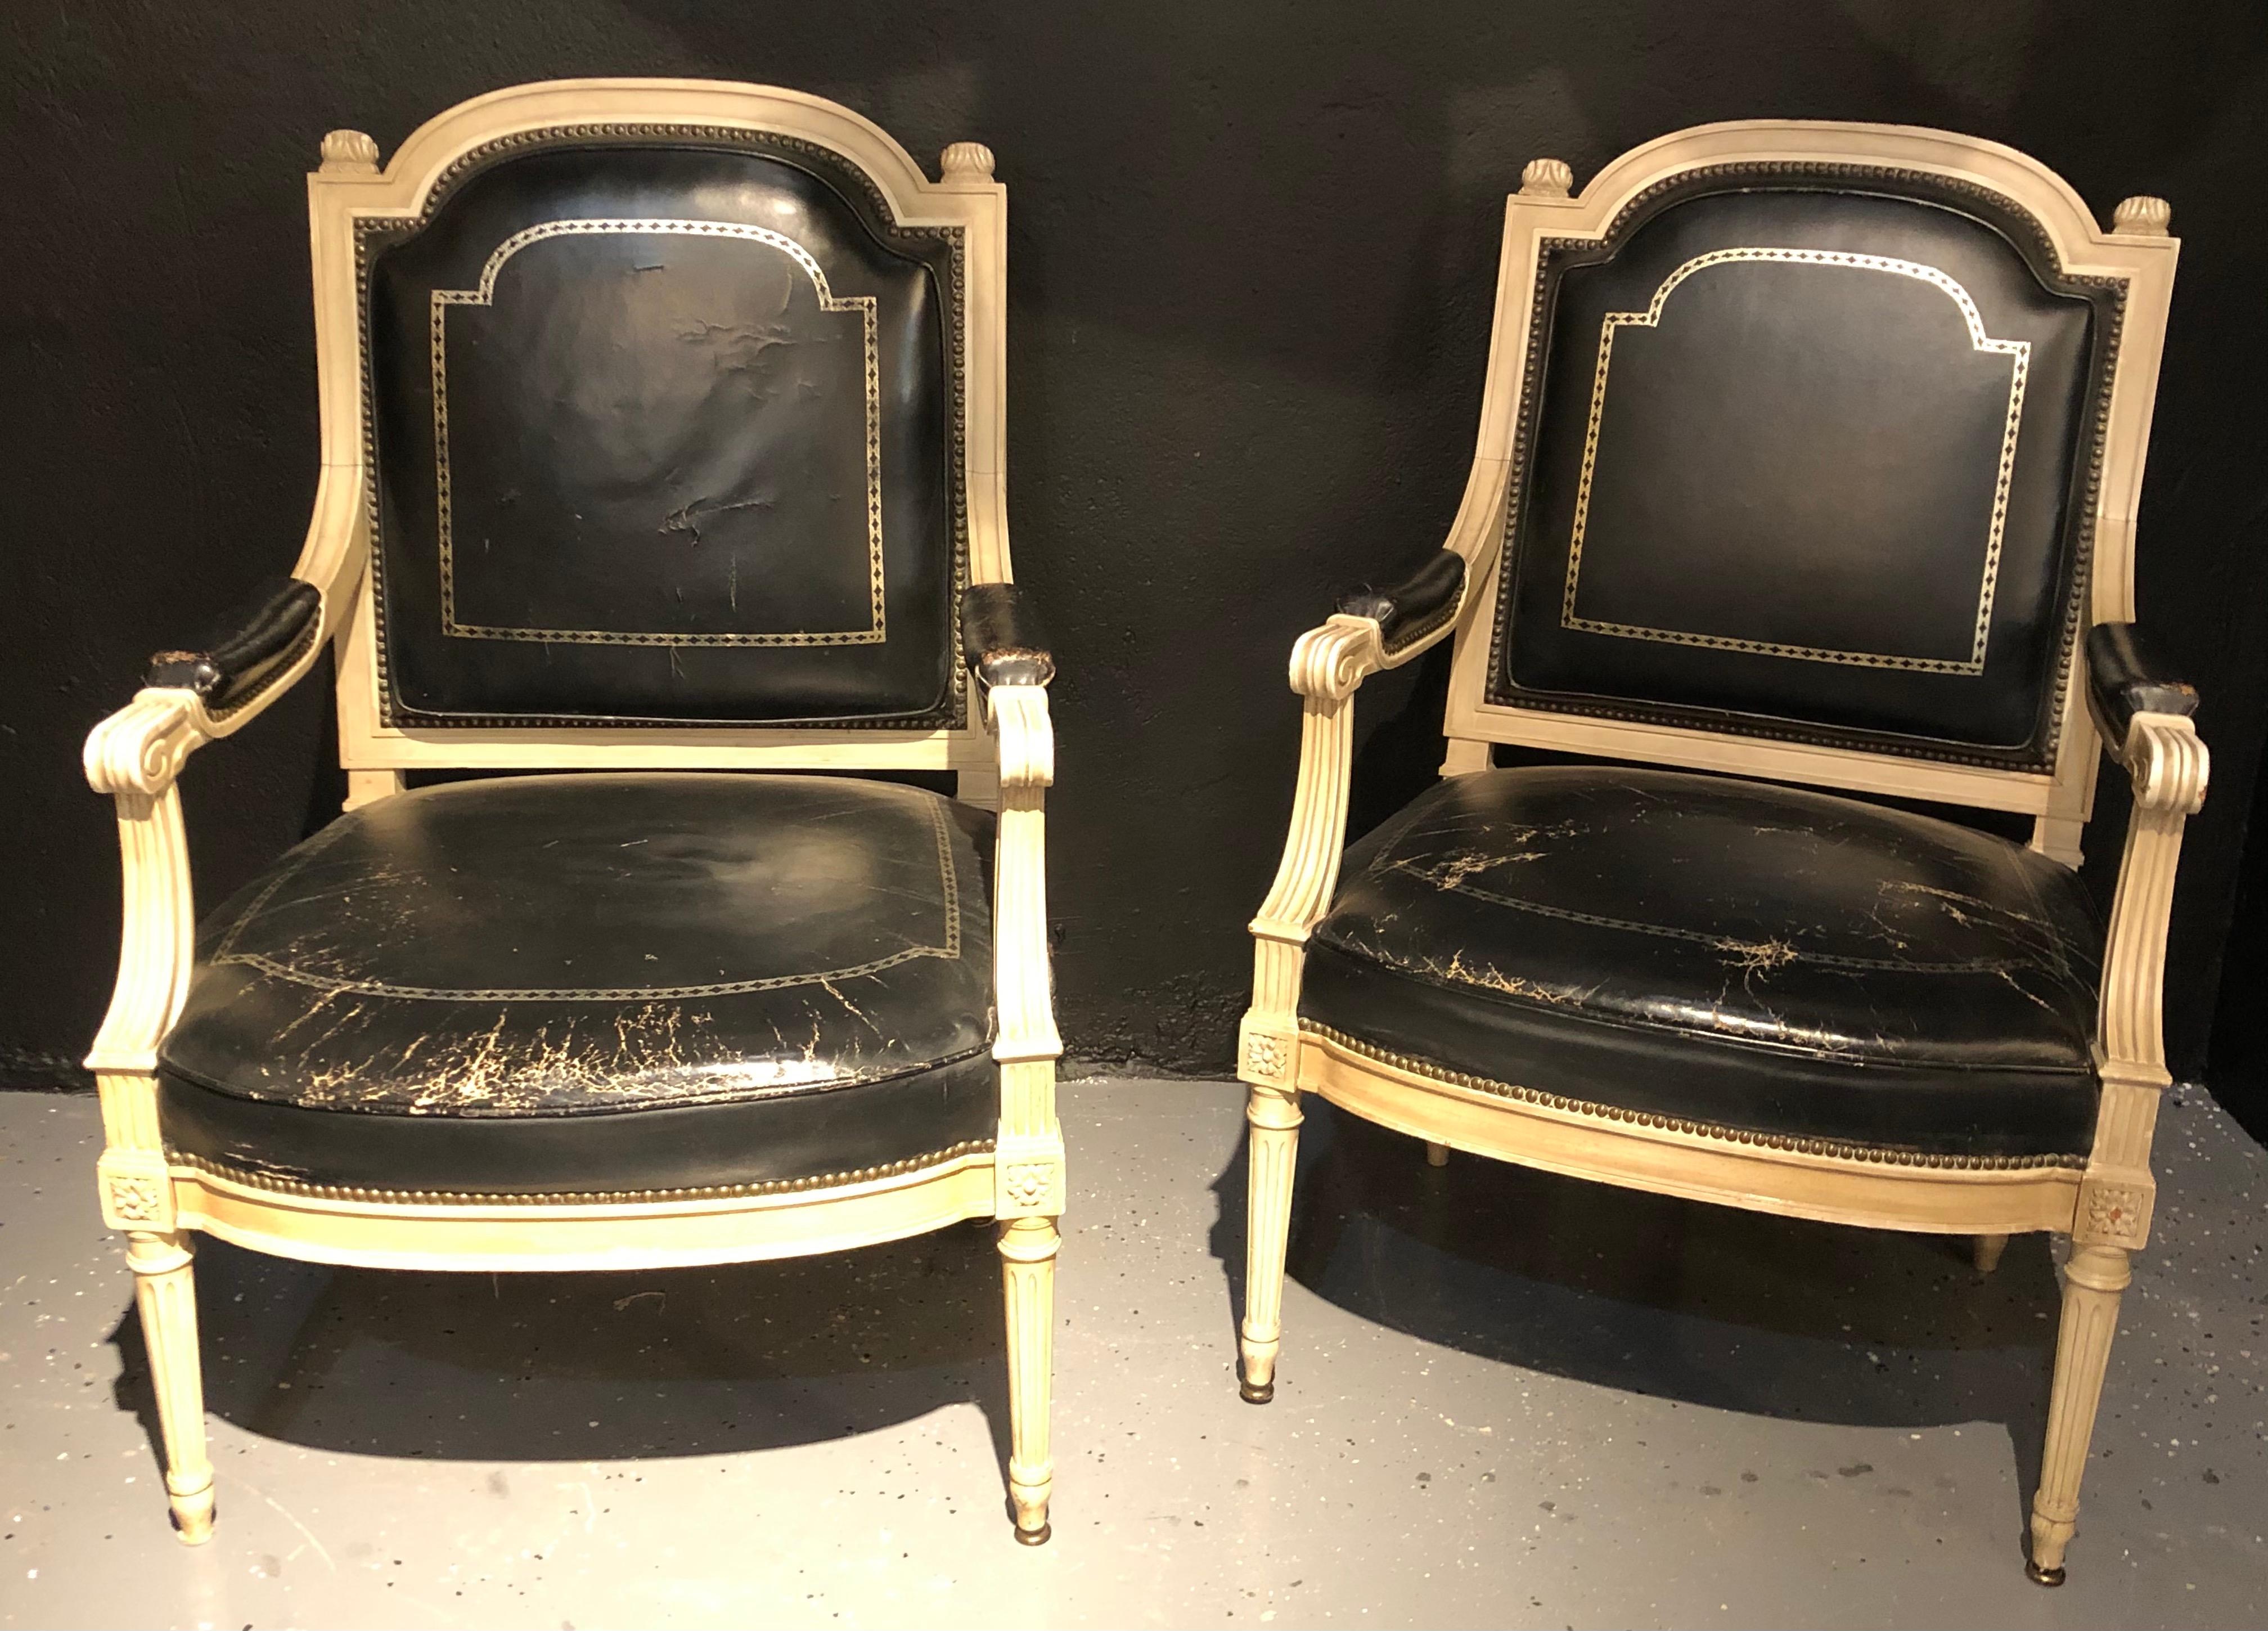 Pair of stamped Jansen bergères/ armchairs black in a tooled leather upholstery. This simply stunning example of this highly sought after designers work depicts the Hollywood Regency era at its peak. The clean sleek and stylish form in a Louis XVI